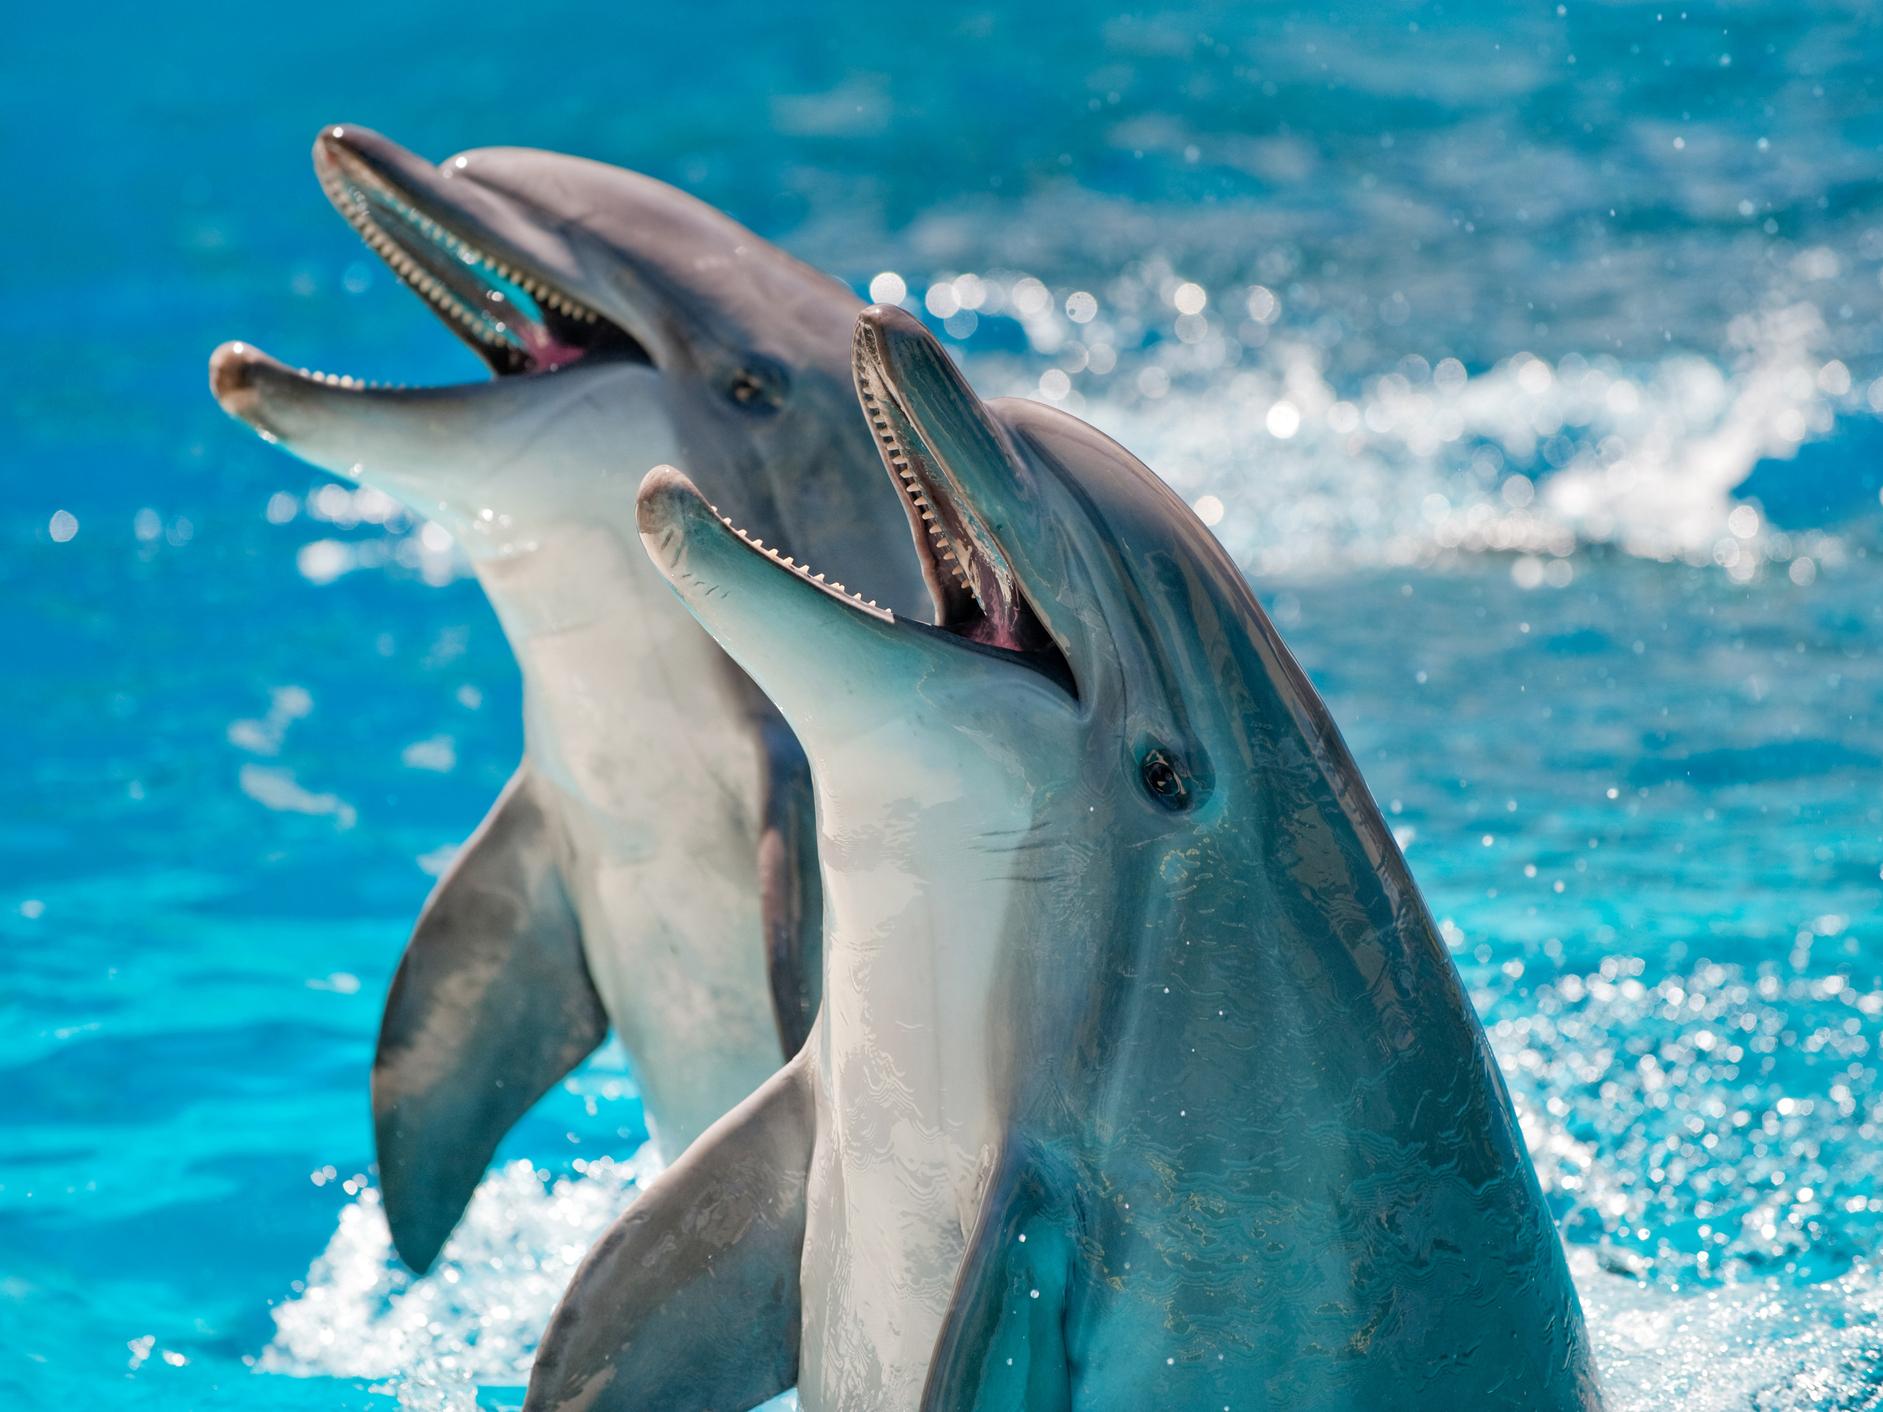 France has banned swimming with dolphins, and put in place new regulations to protect marine wildlife